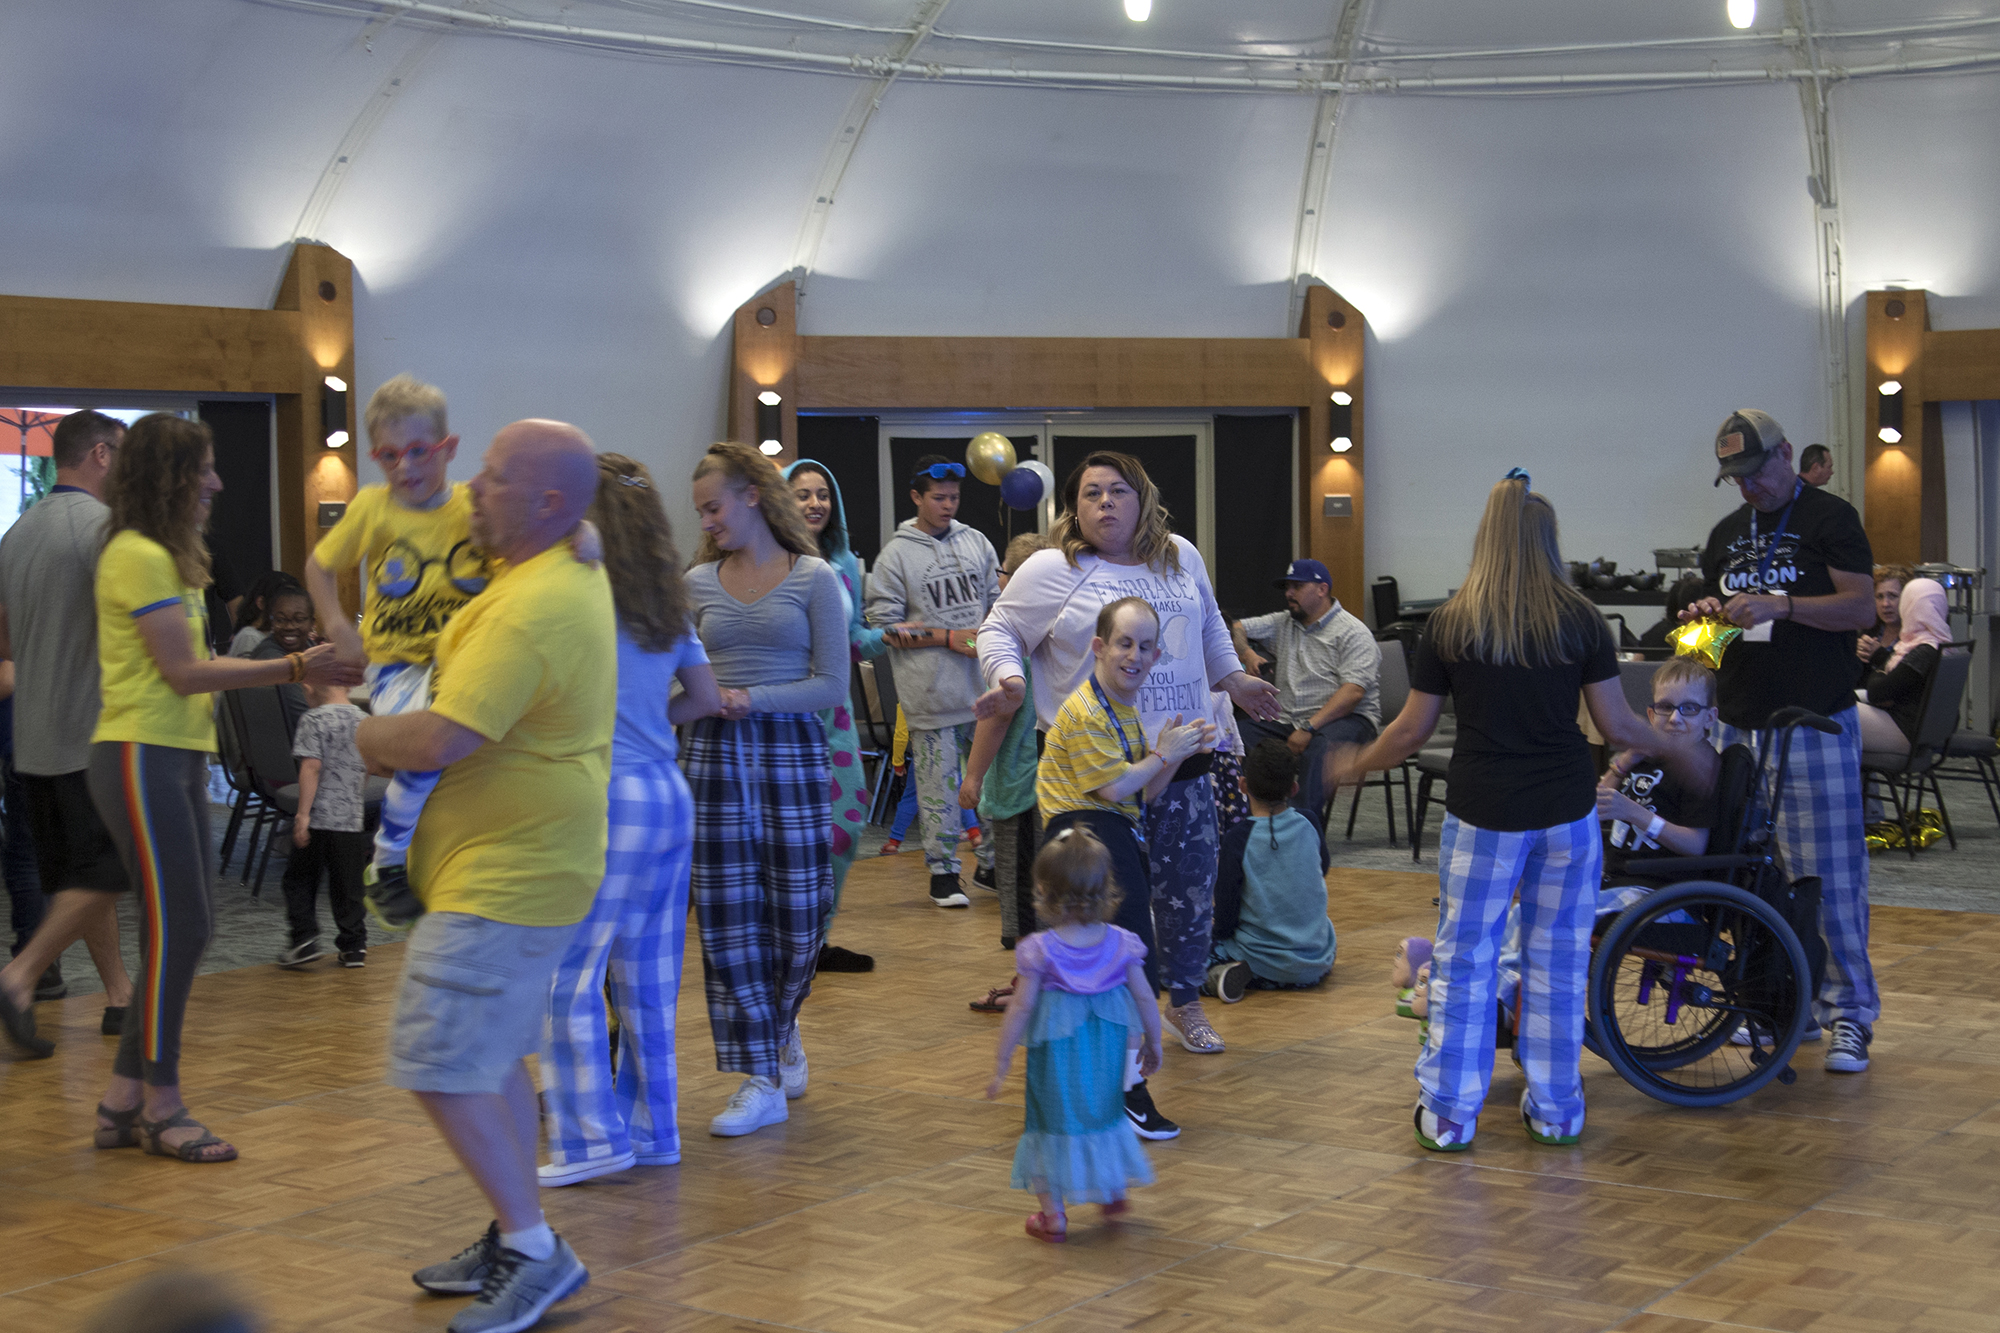 Pajama party and dancing at conference